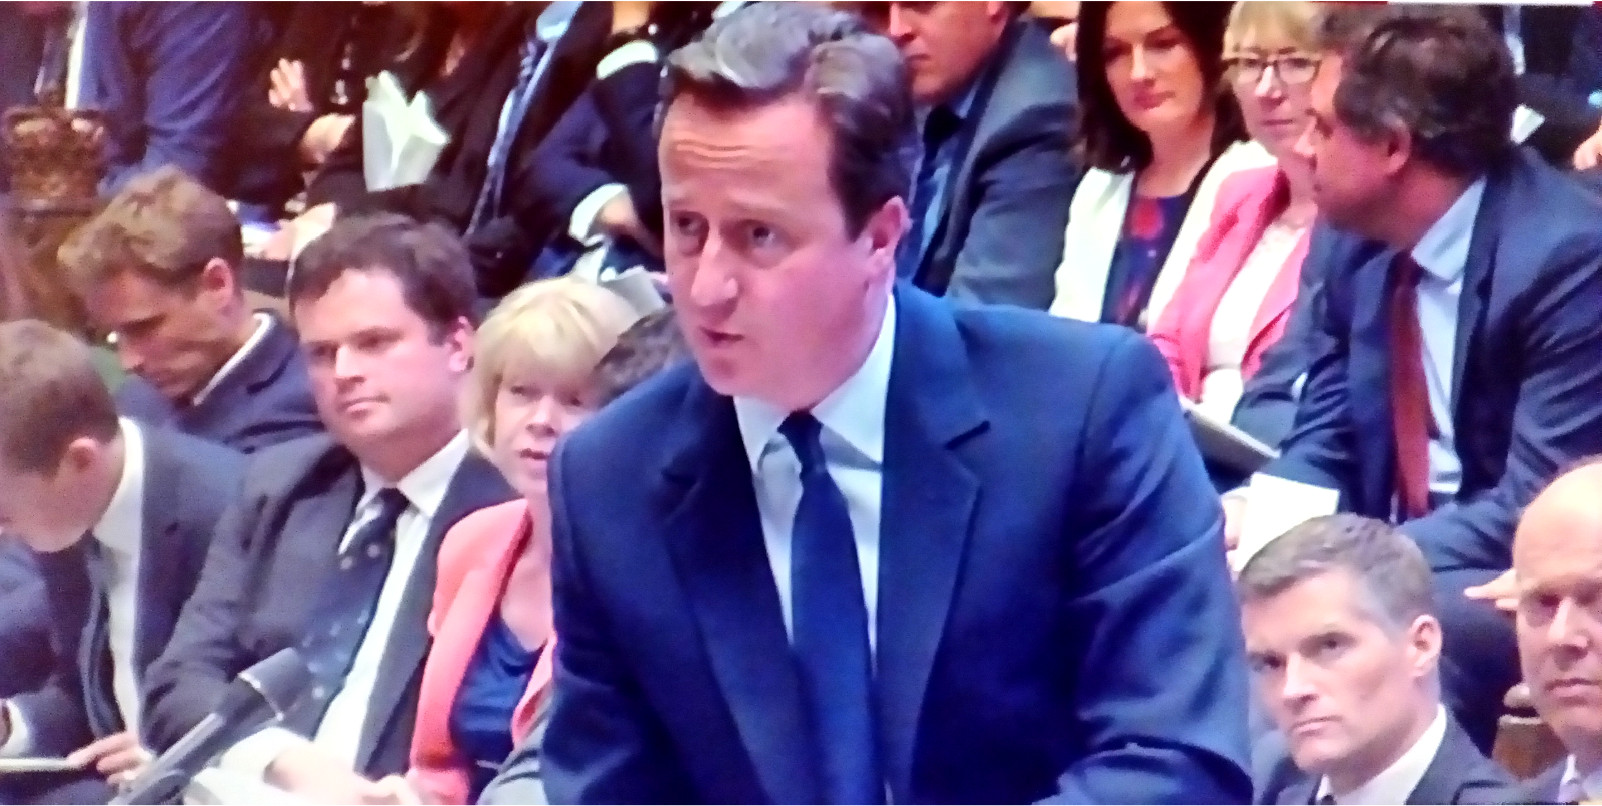 David Cameron at the House of Commons following the EU referendum.